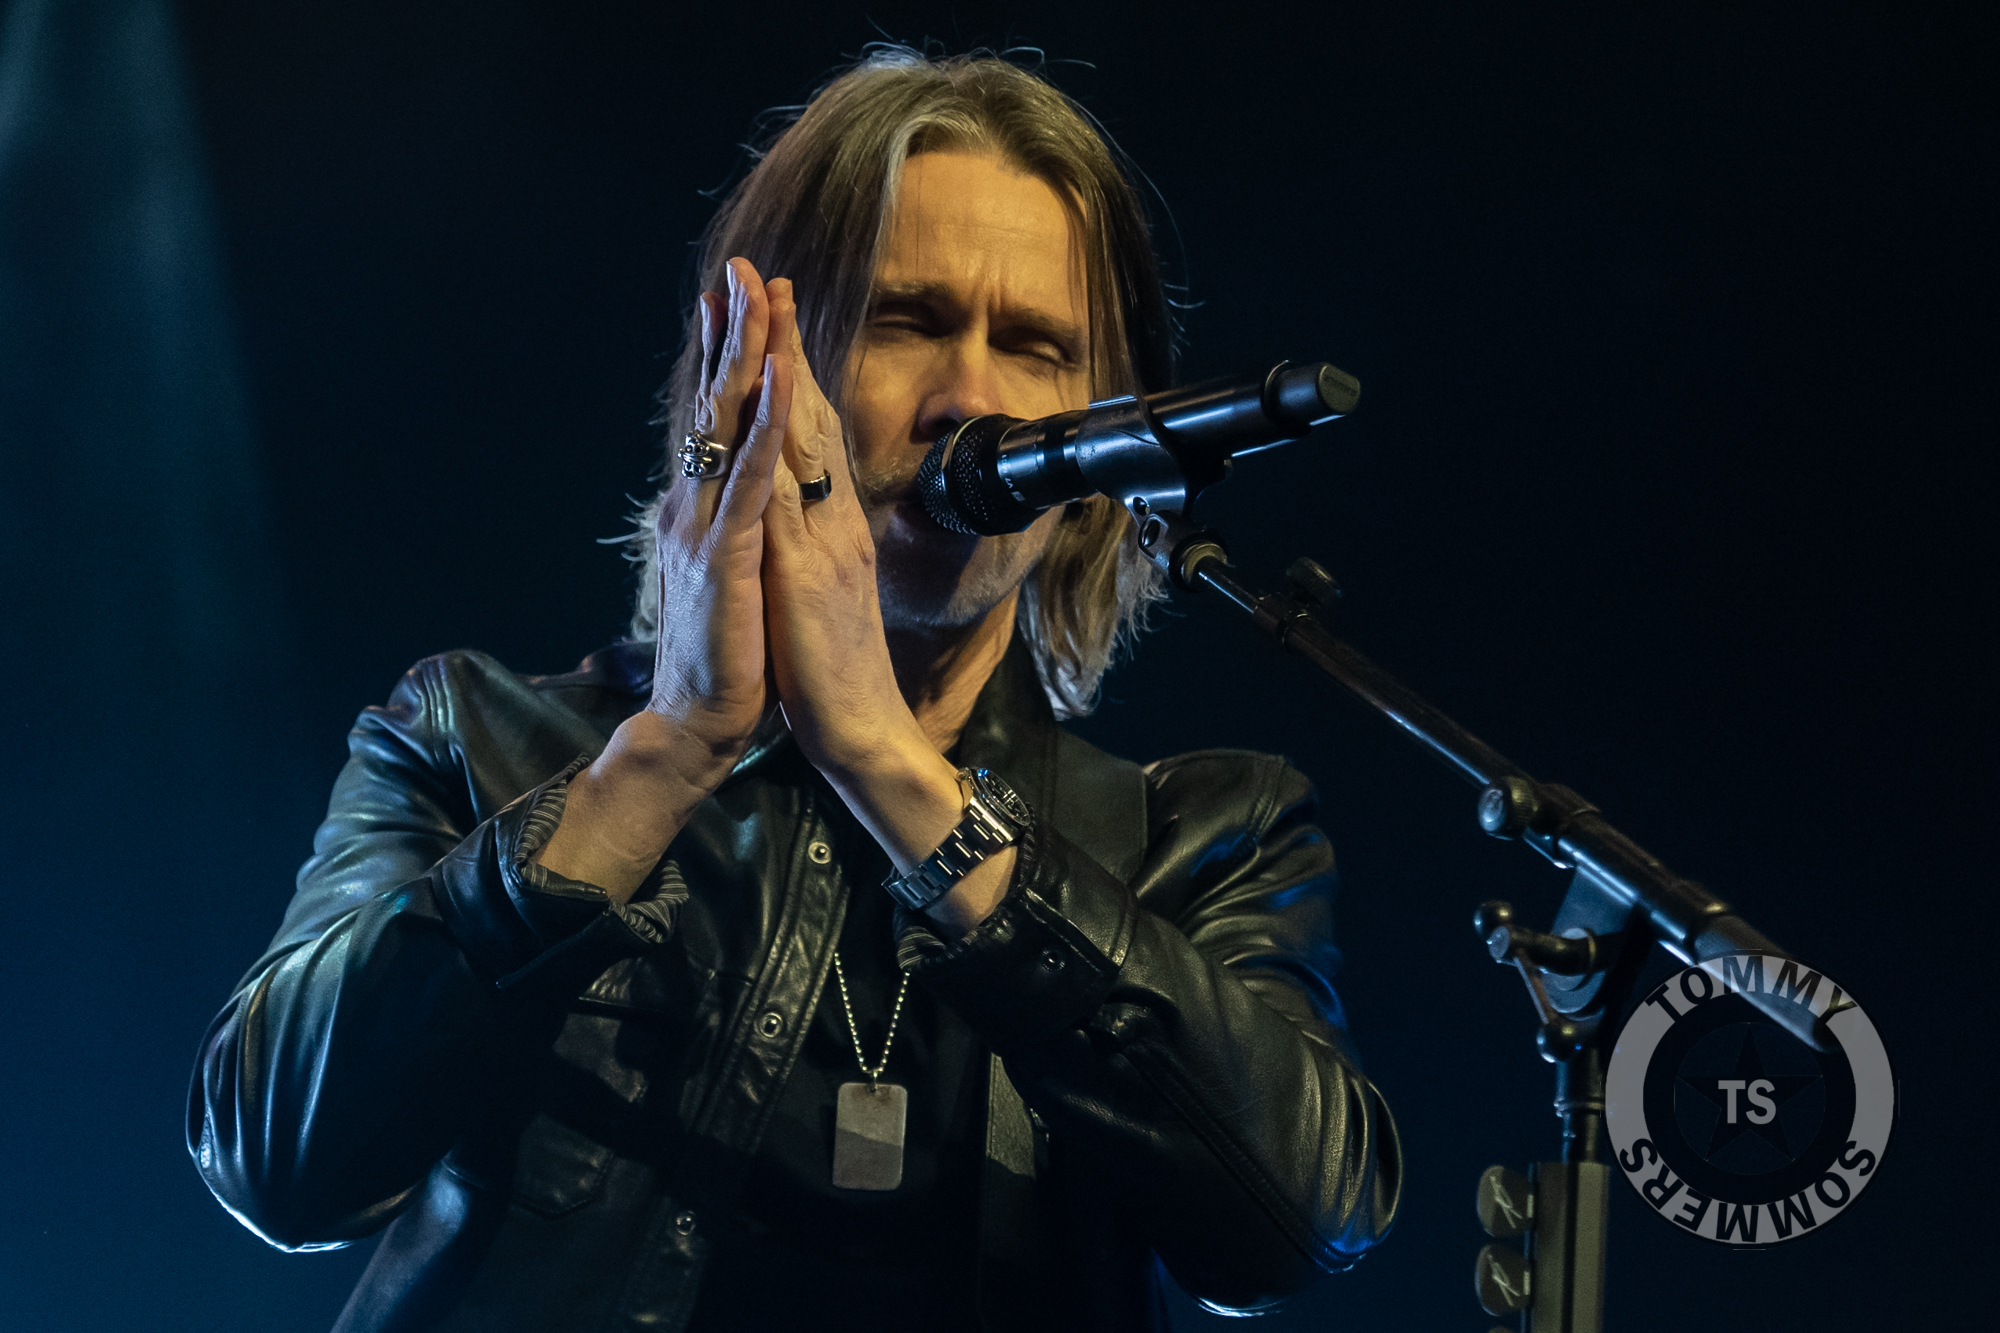 LIVE REVIEW: Alter Bridge at The Criterion in Oklahoma City, OK on March  15, 2023 - Manor 208